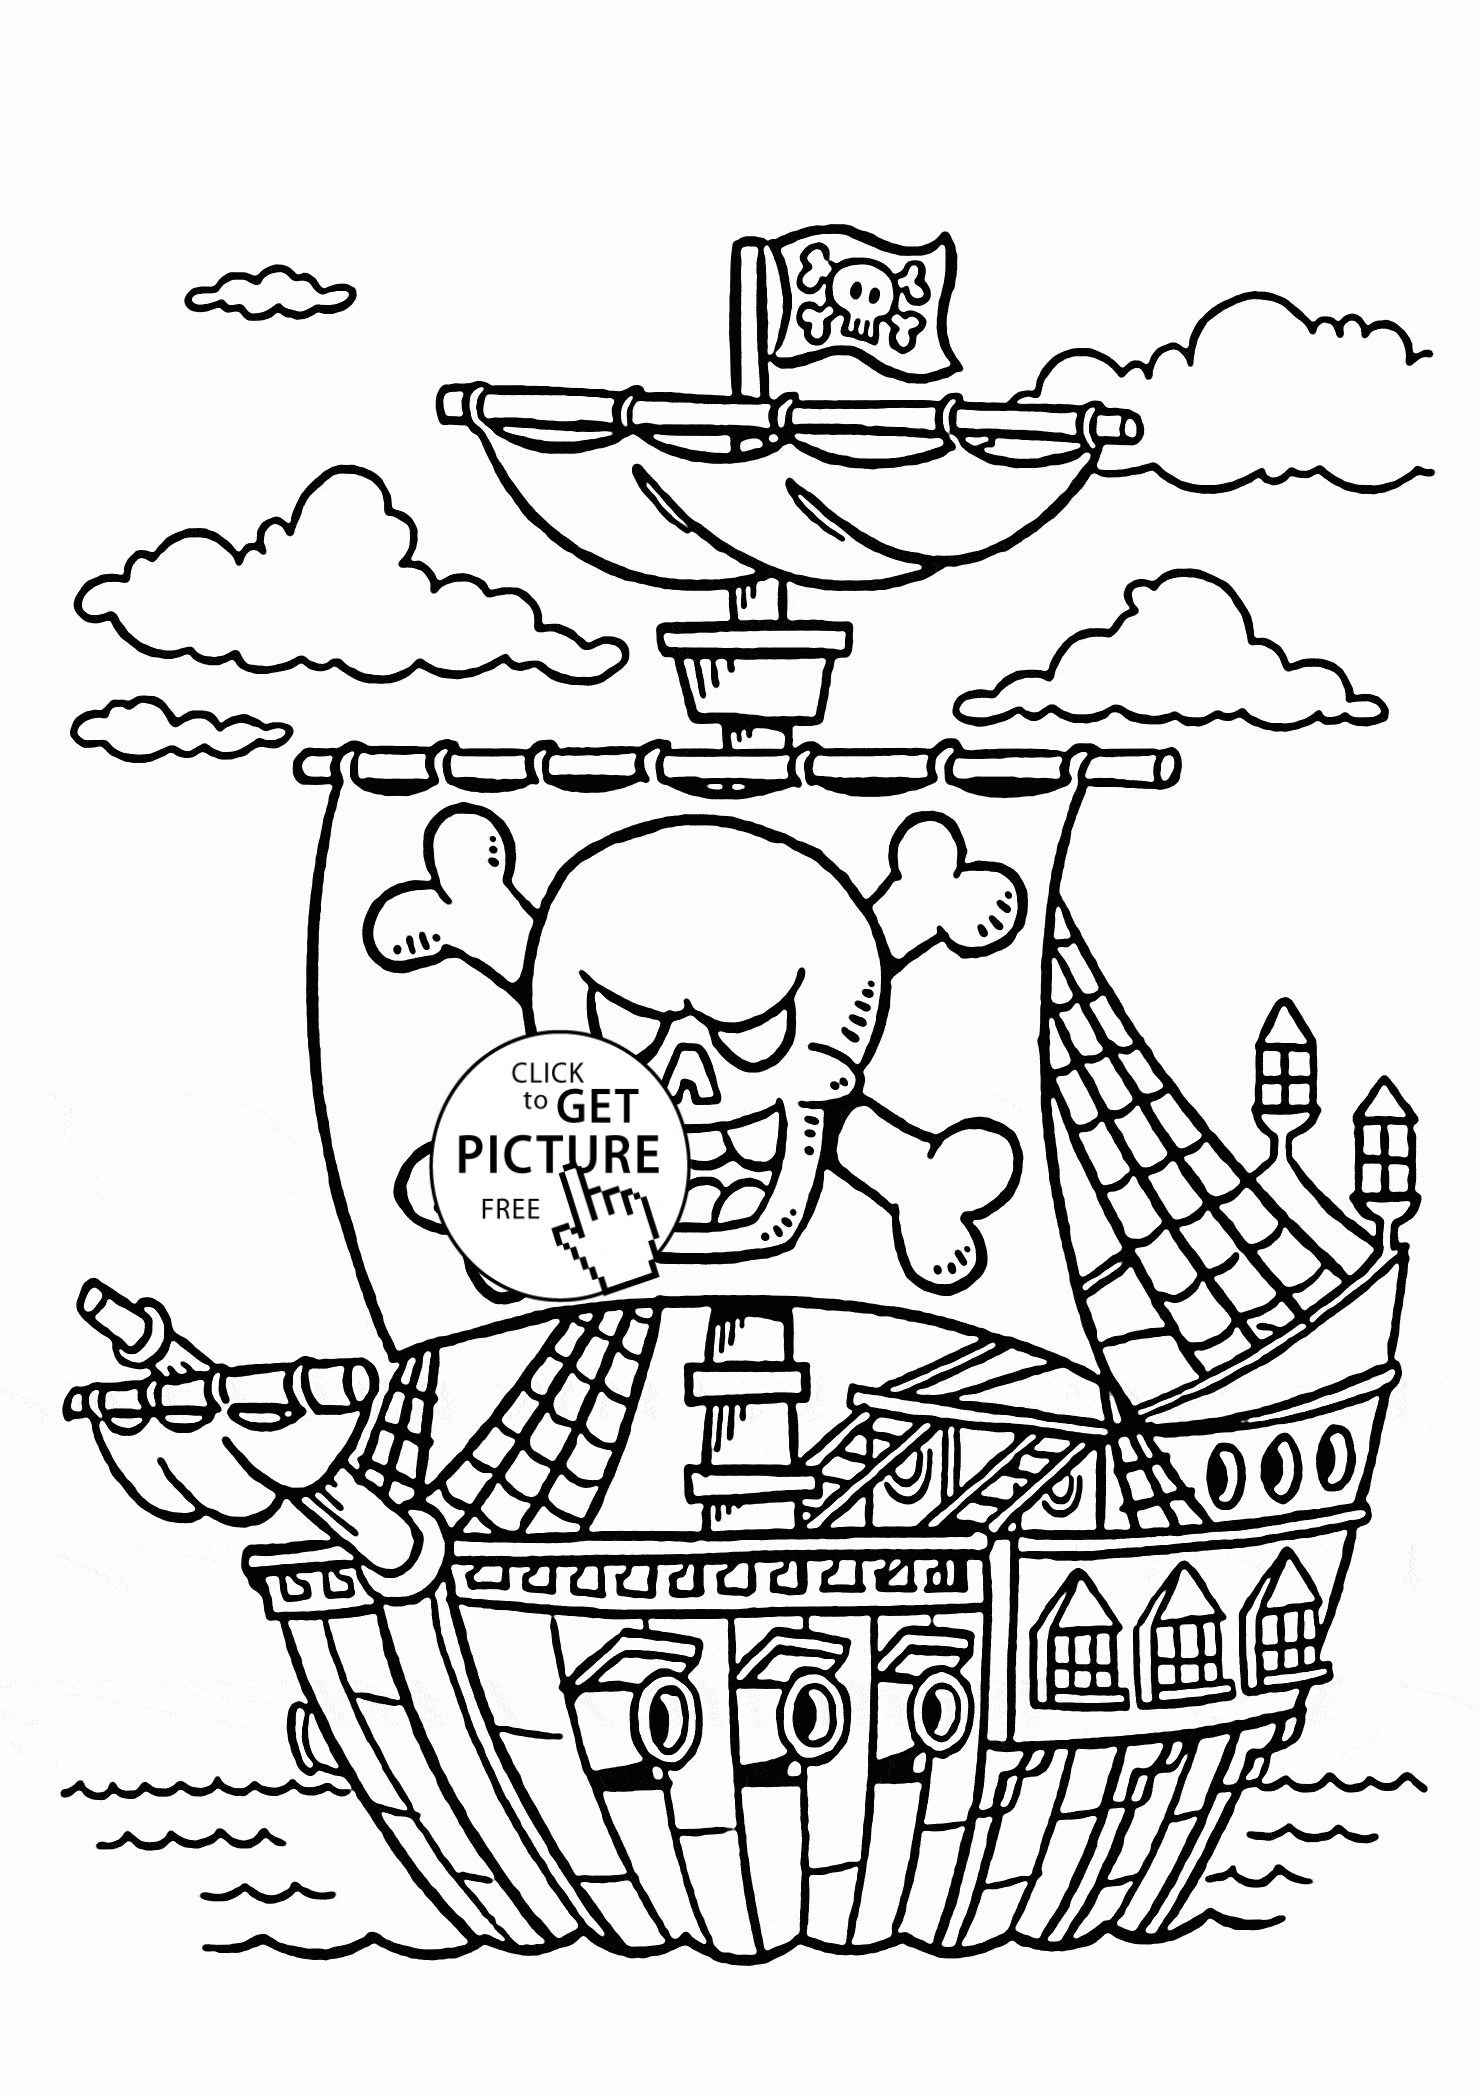 Pirate Ship coloring page for kids, transportation coloring pages ...